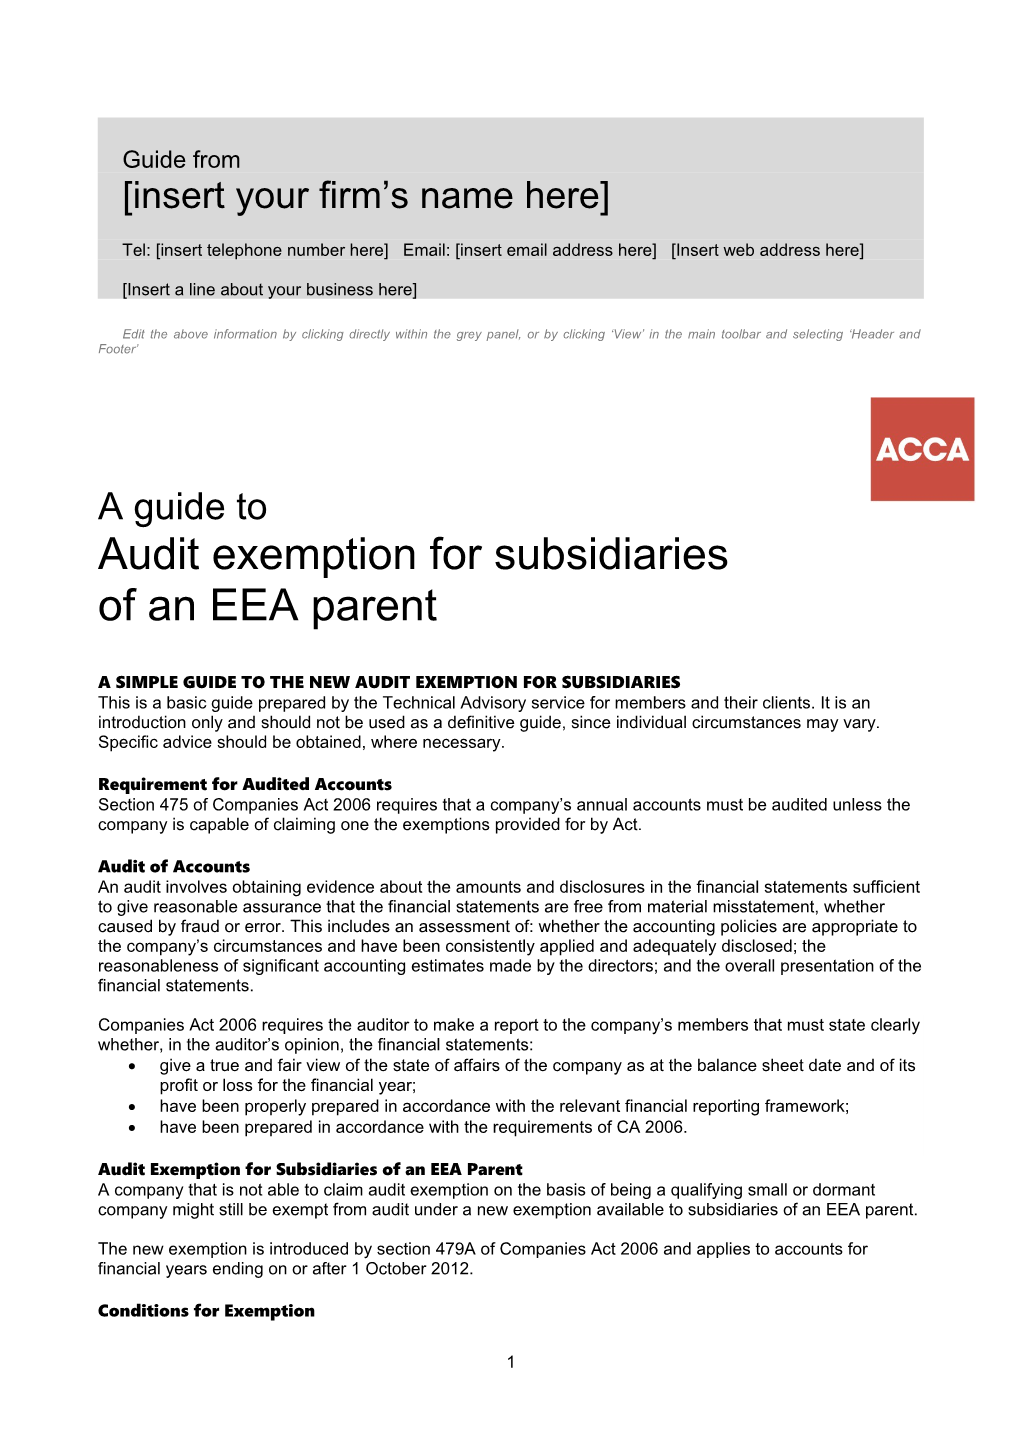 A Simple Guide to the New Audit Exemption for Subsidiaries